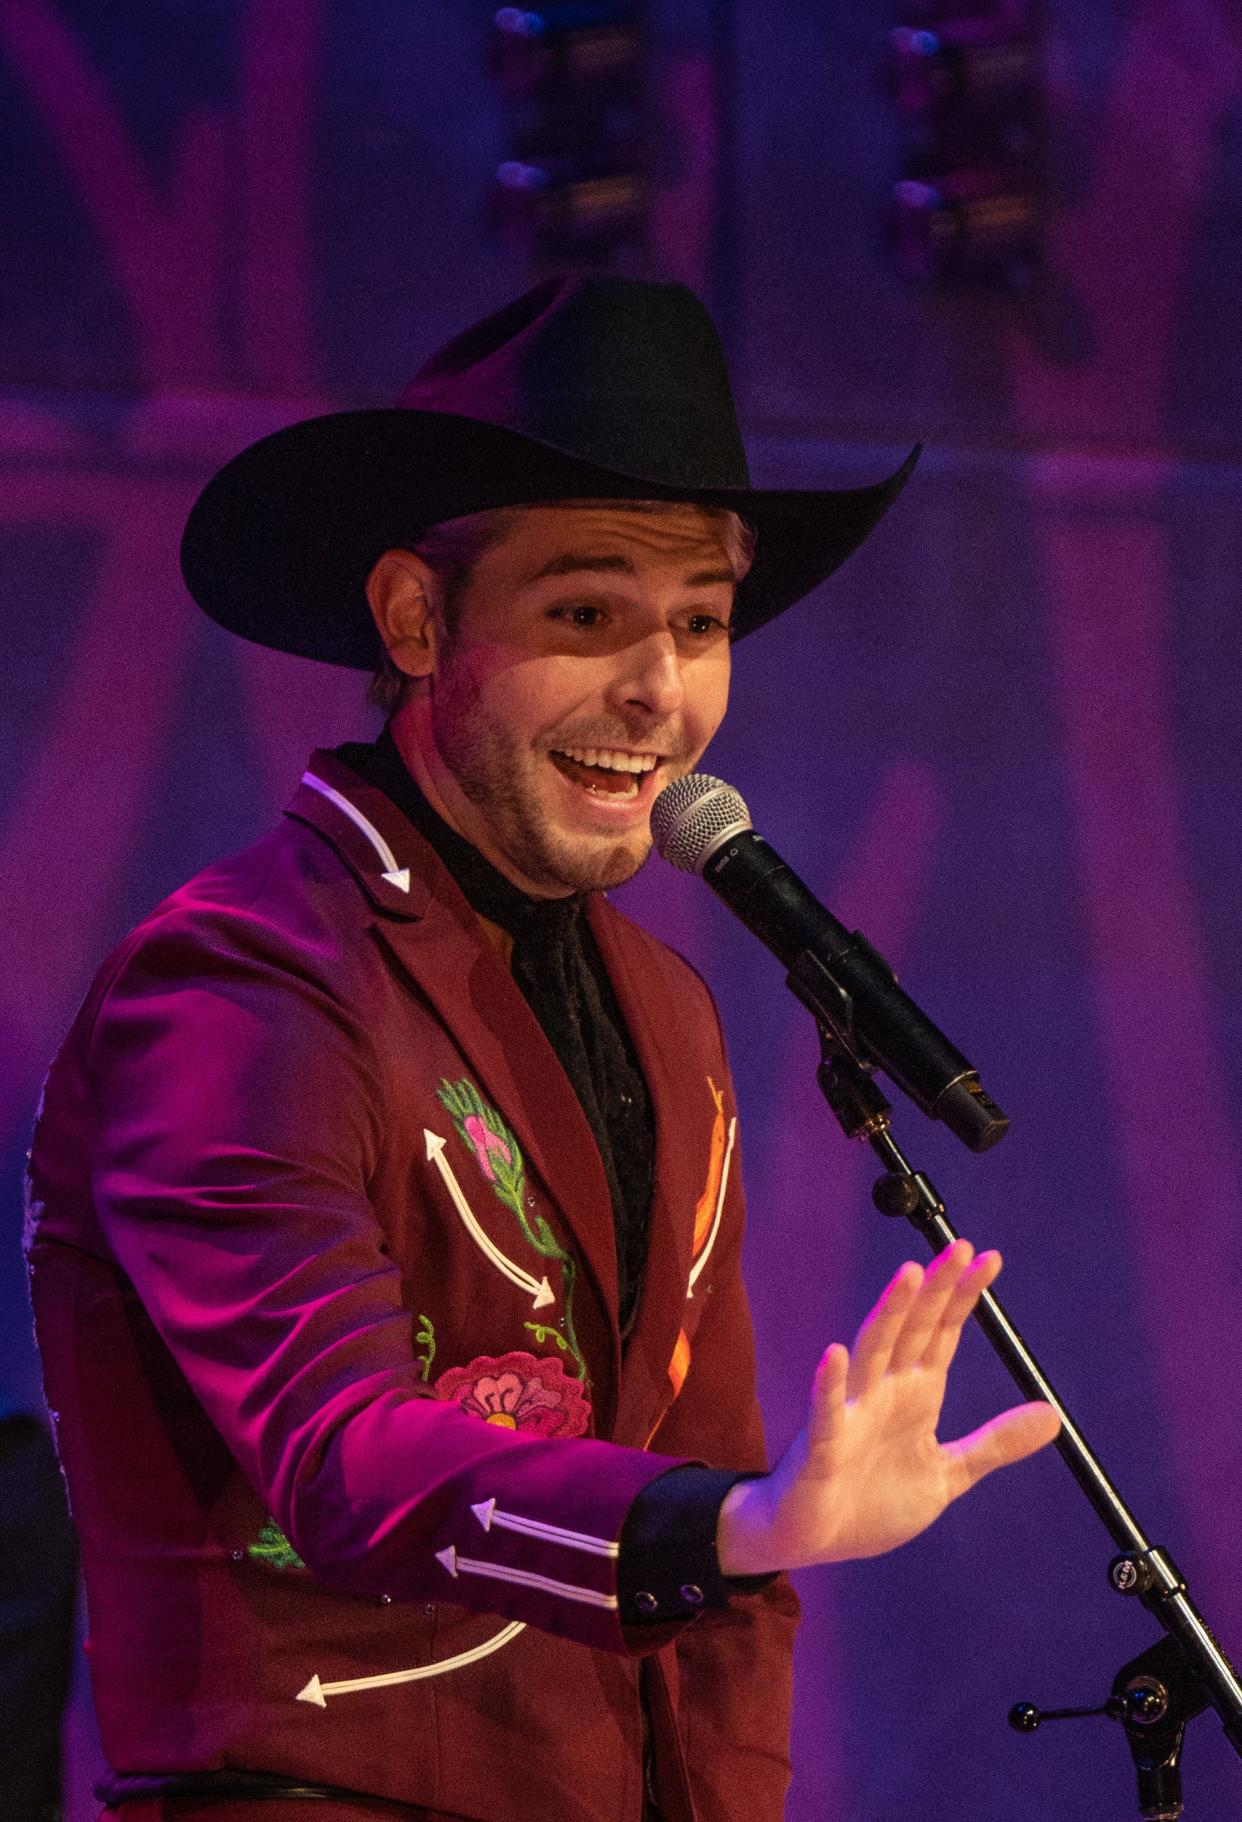 Sam Williams acknowledges someone in the audience before performing his version of "I'm So Lonely I could Cry," a song written by his grandfather, Hank Williams, during Hank WIlliams' 100th birthday celebration at Country Music Hall of Fame Thursday afternoon, Sept. 21, 2023.